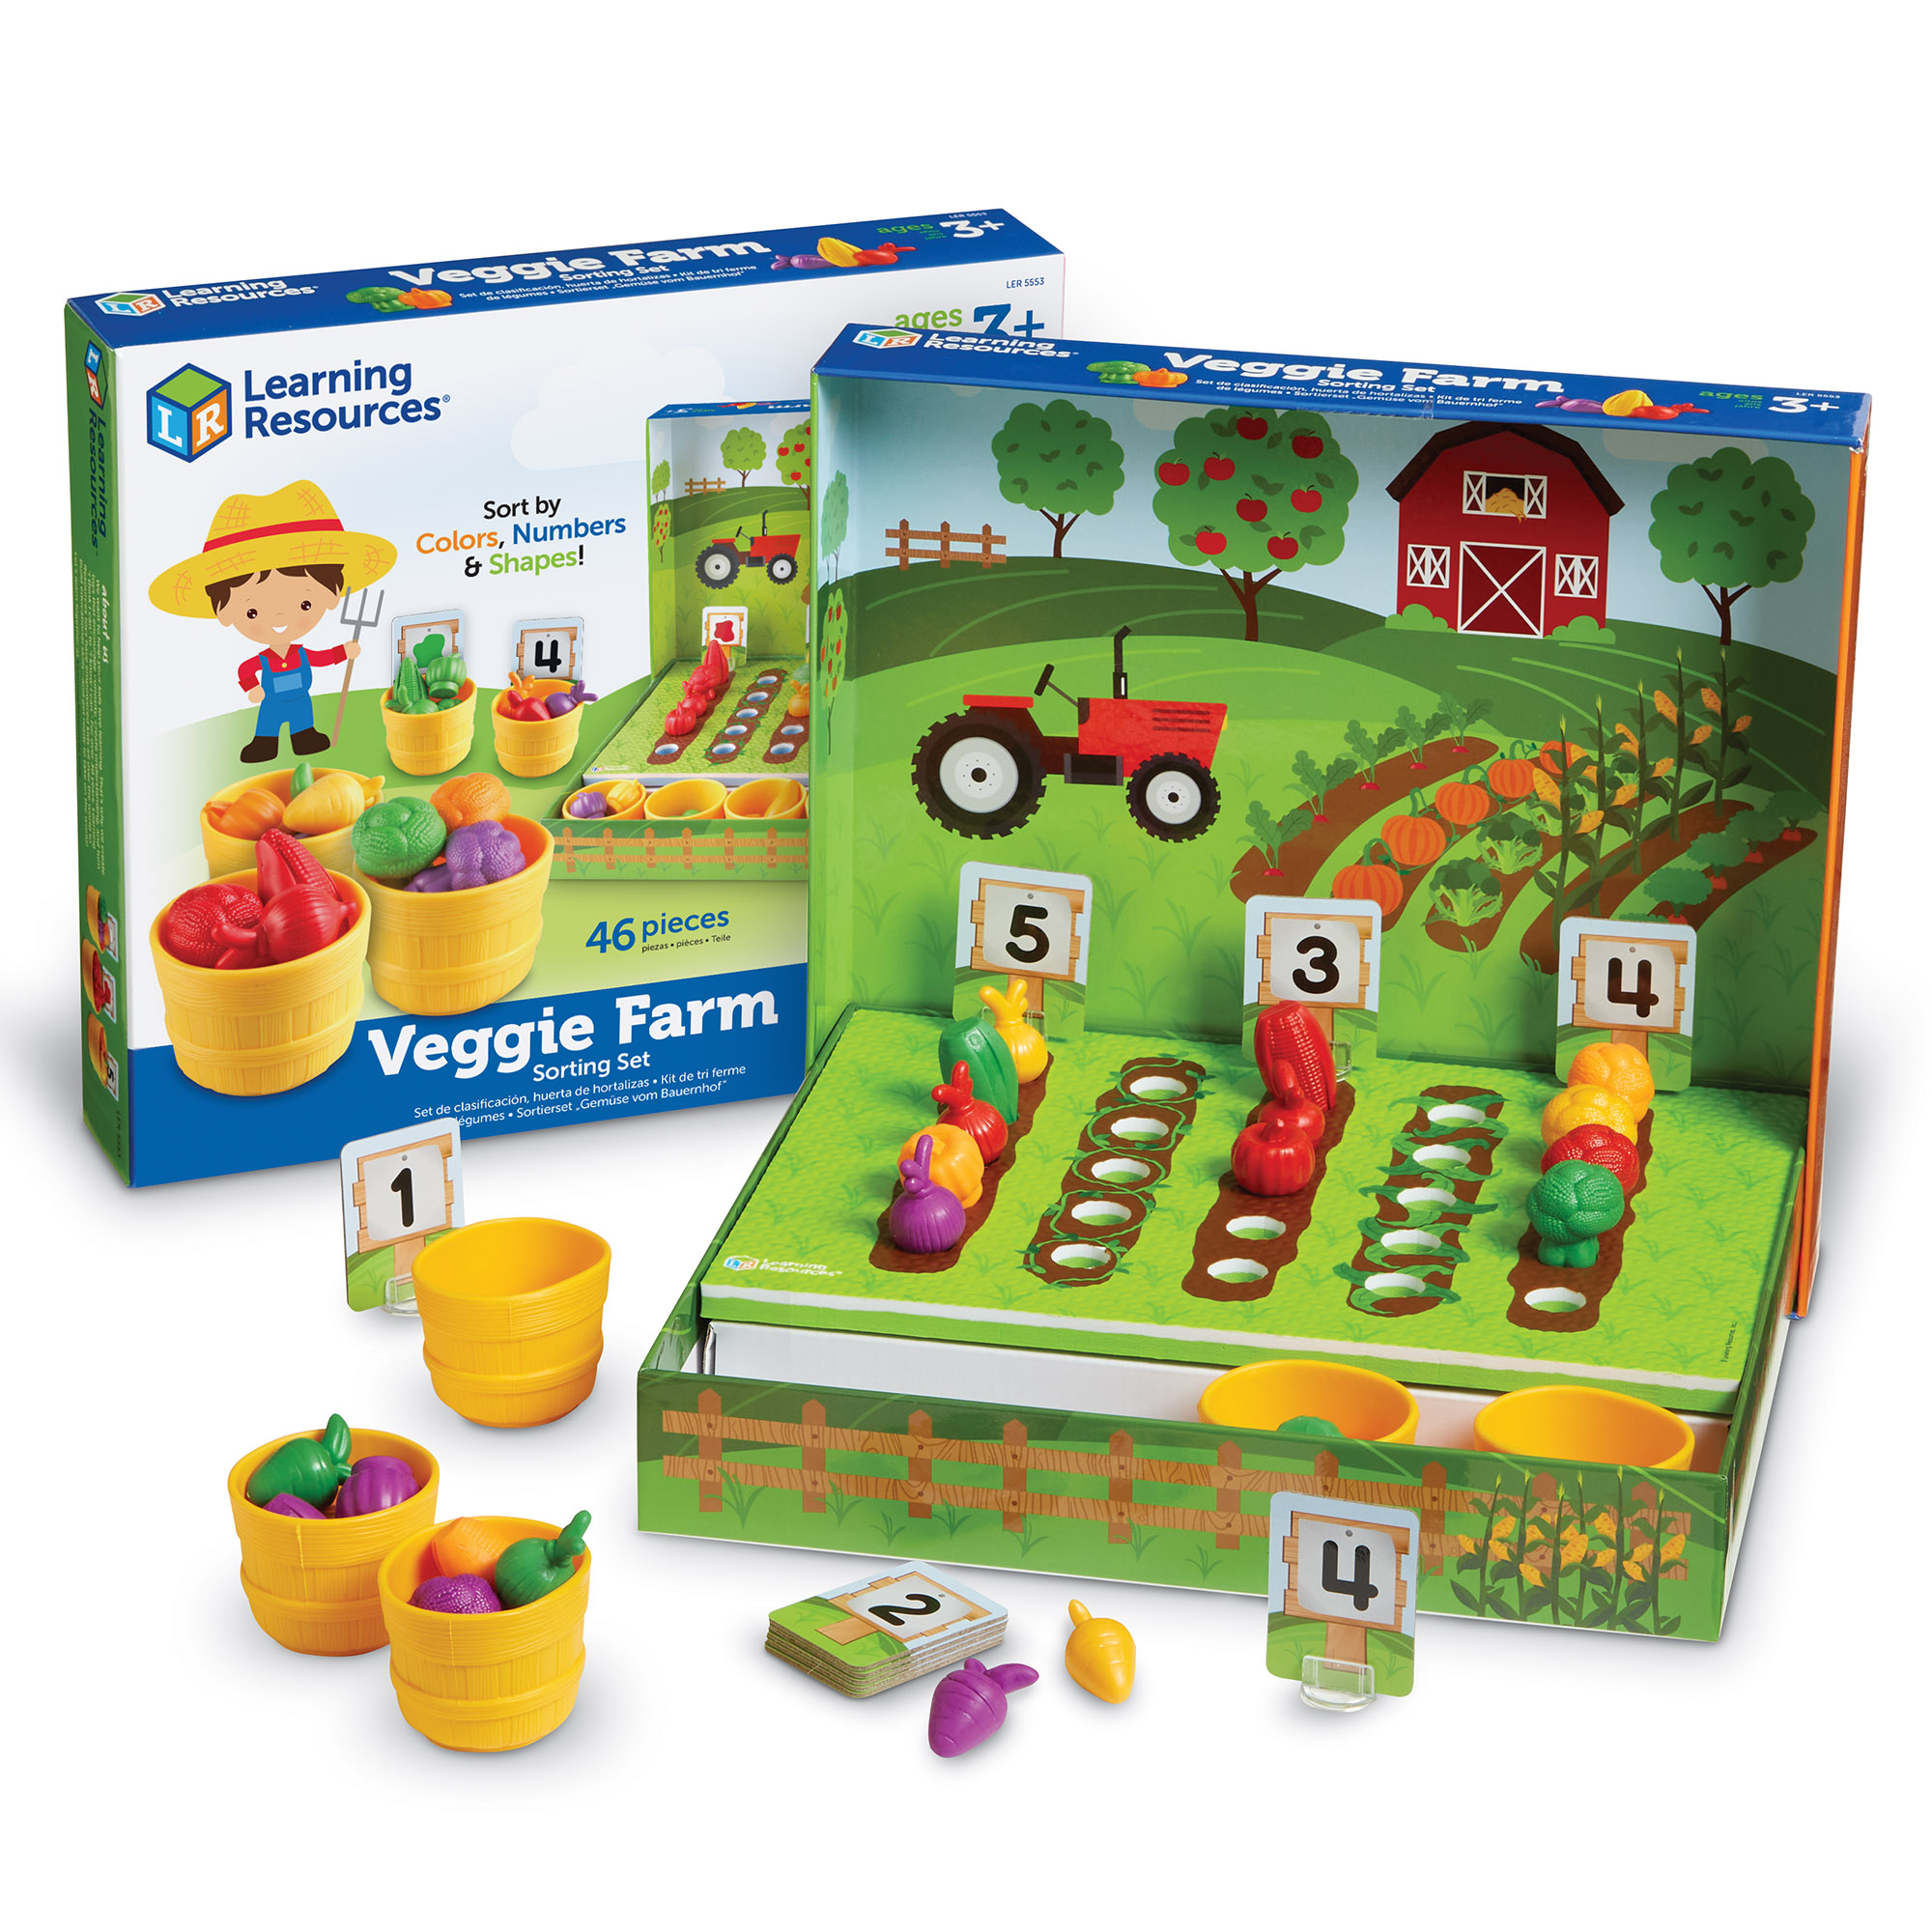 Learning Resources Veggie Farm Sorting Set, Color Sorting and Early Counting, Preschool Game, 46 Pieces, Ages 3,4,5+ - image 1 of 8